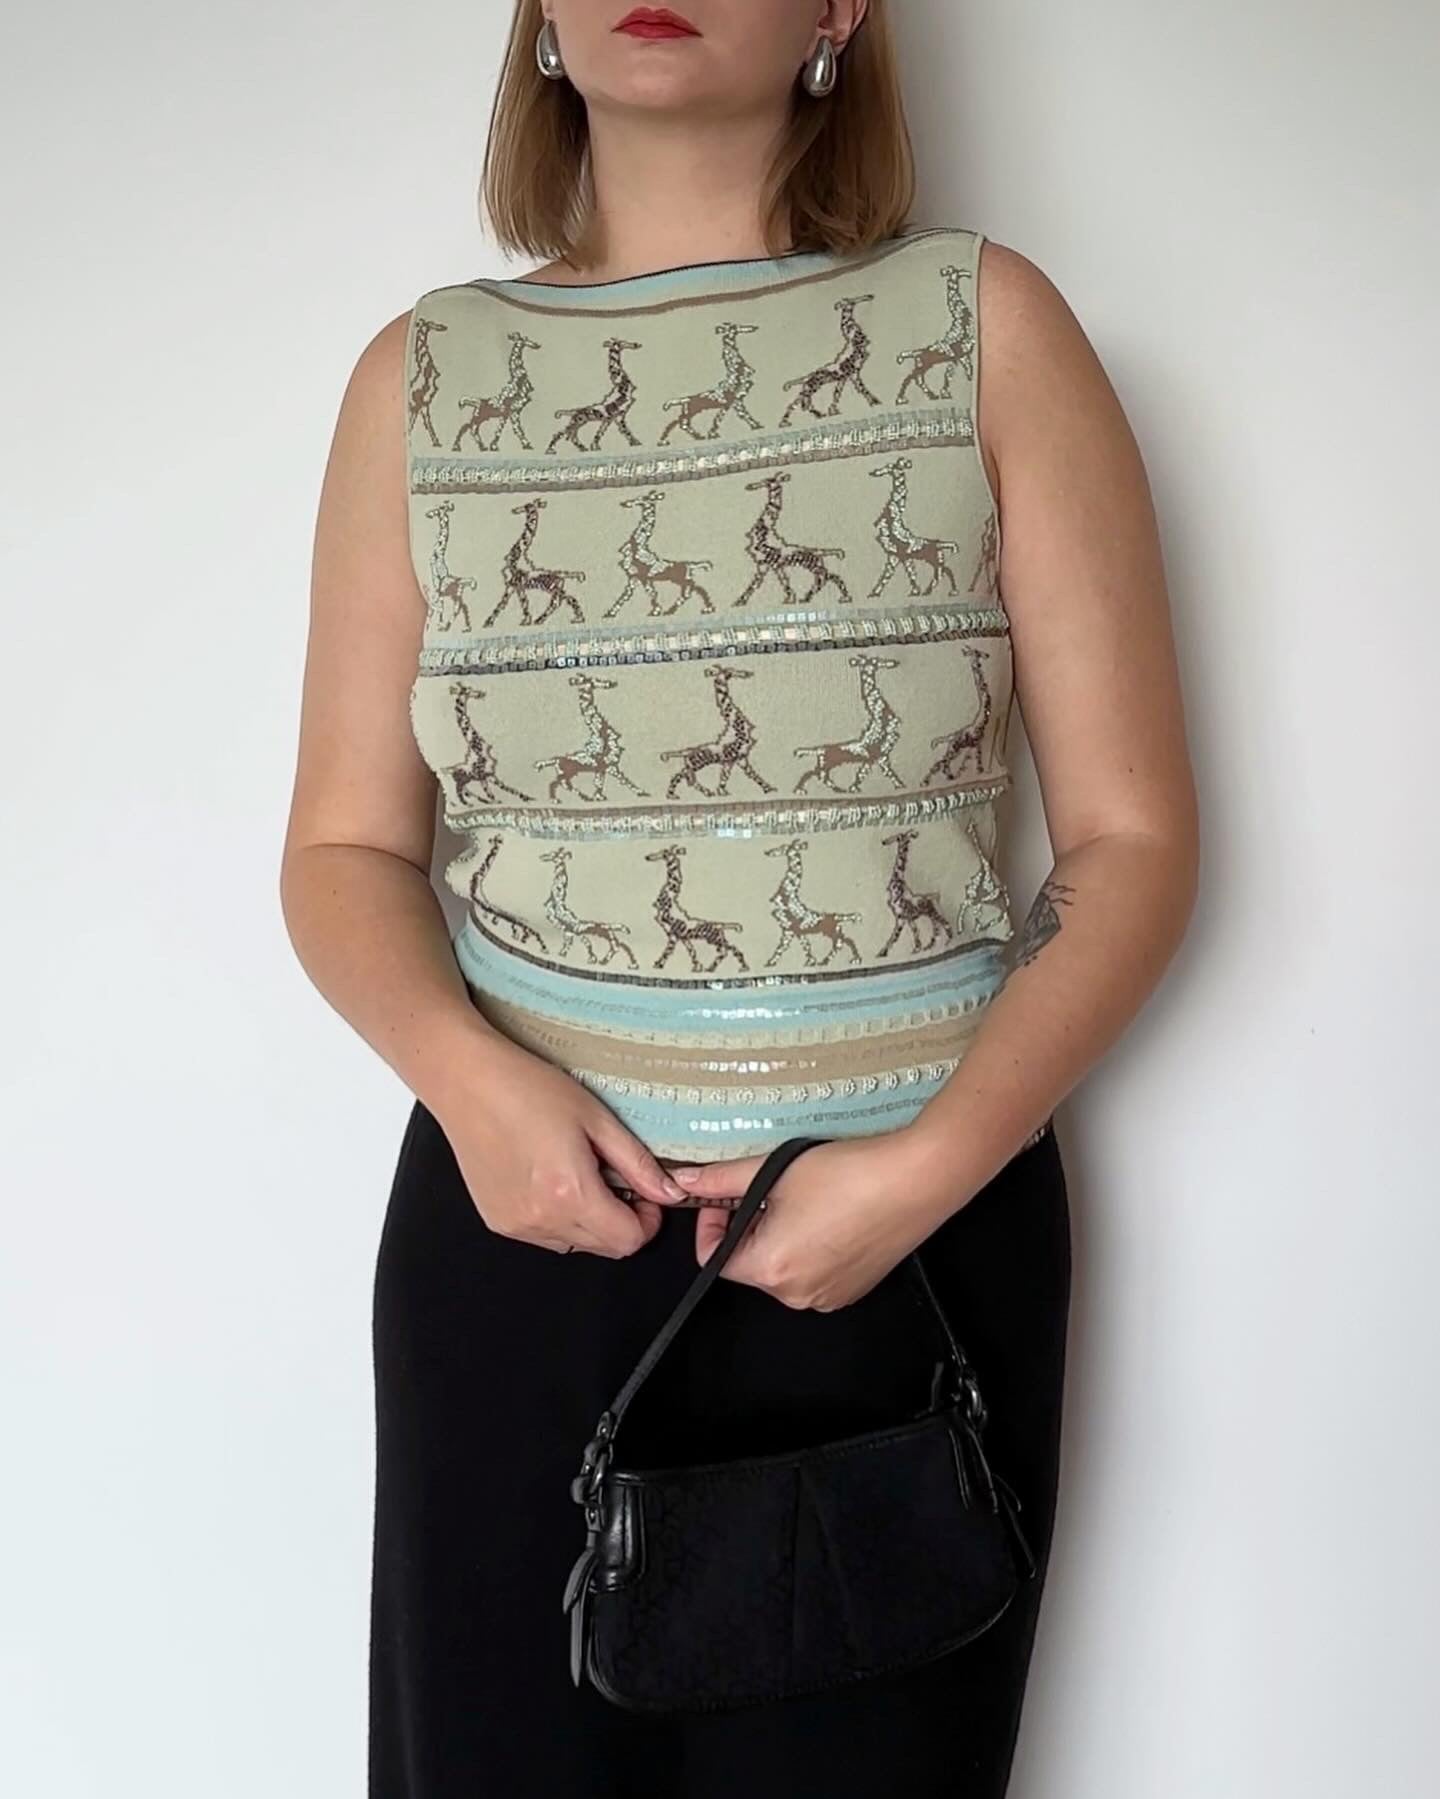 Gorgeous vintage sleeveless knit top by French brand Jesire